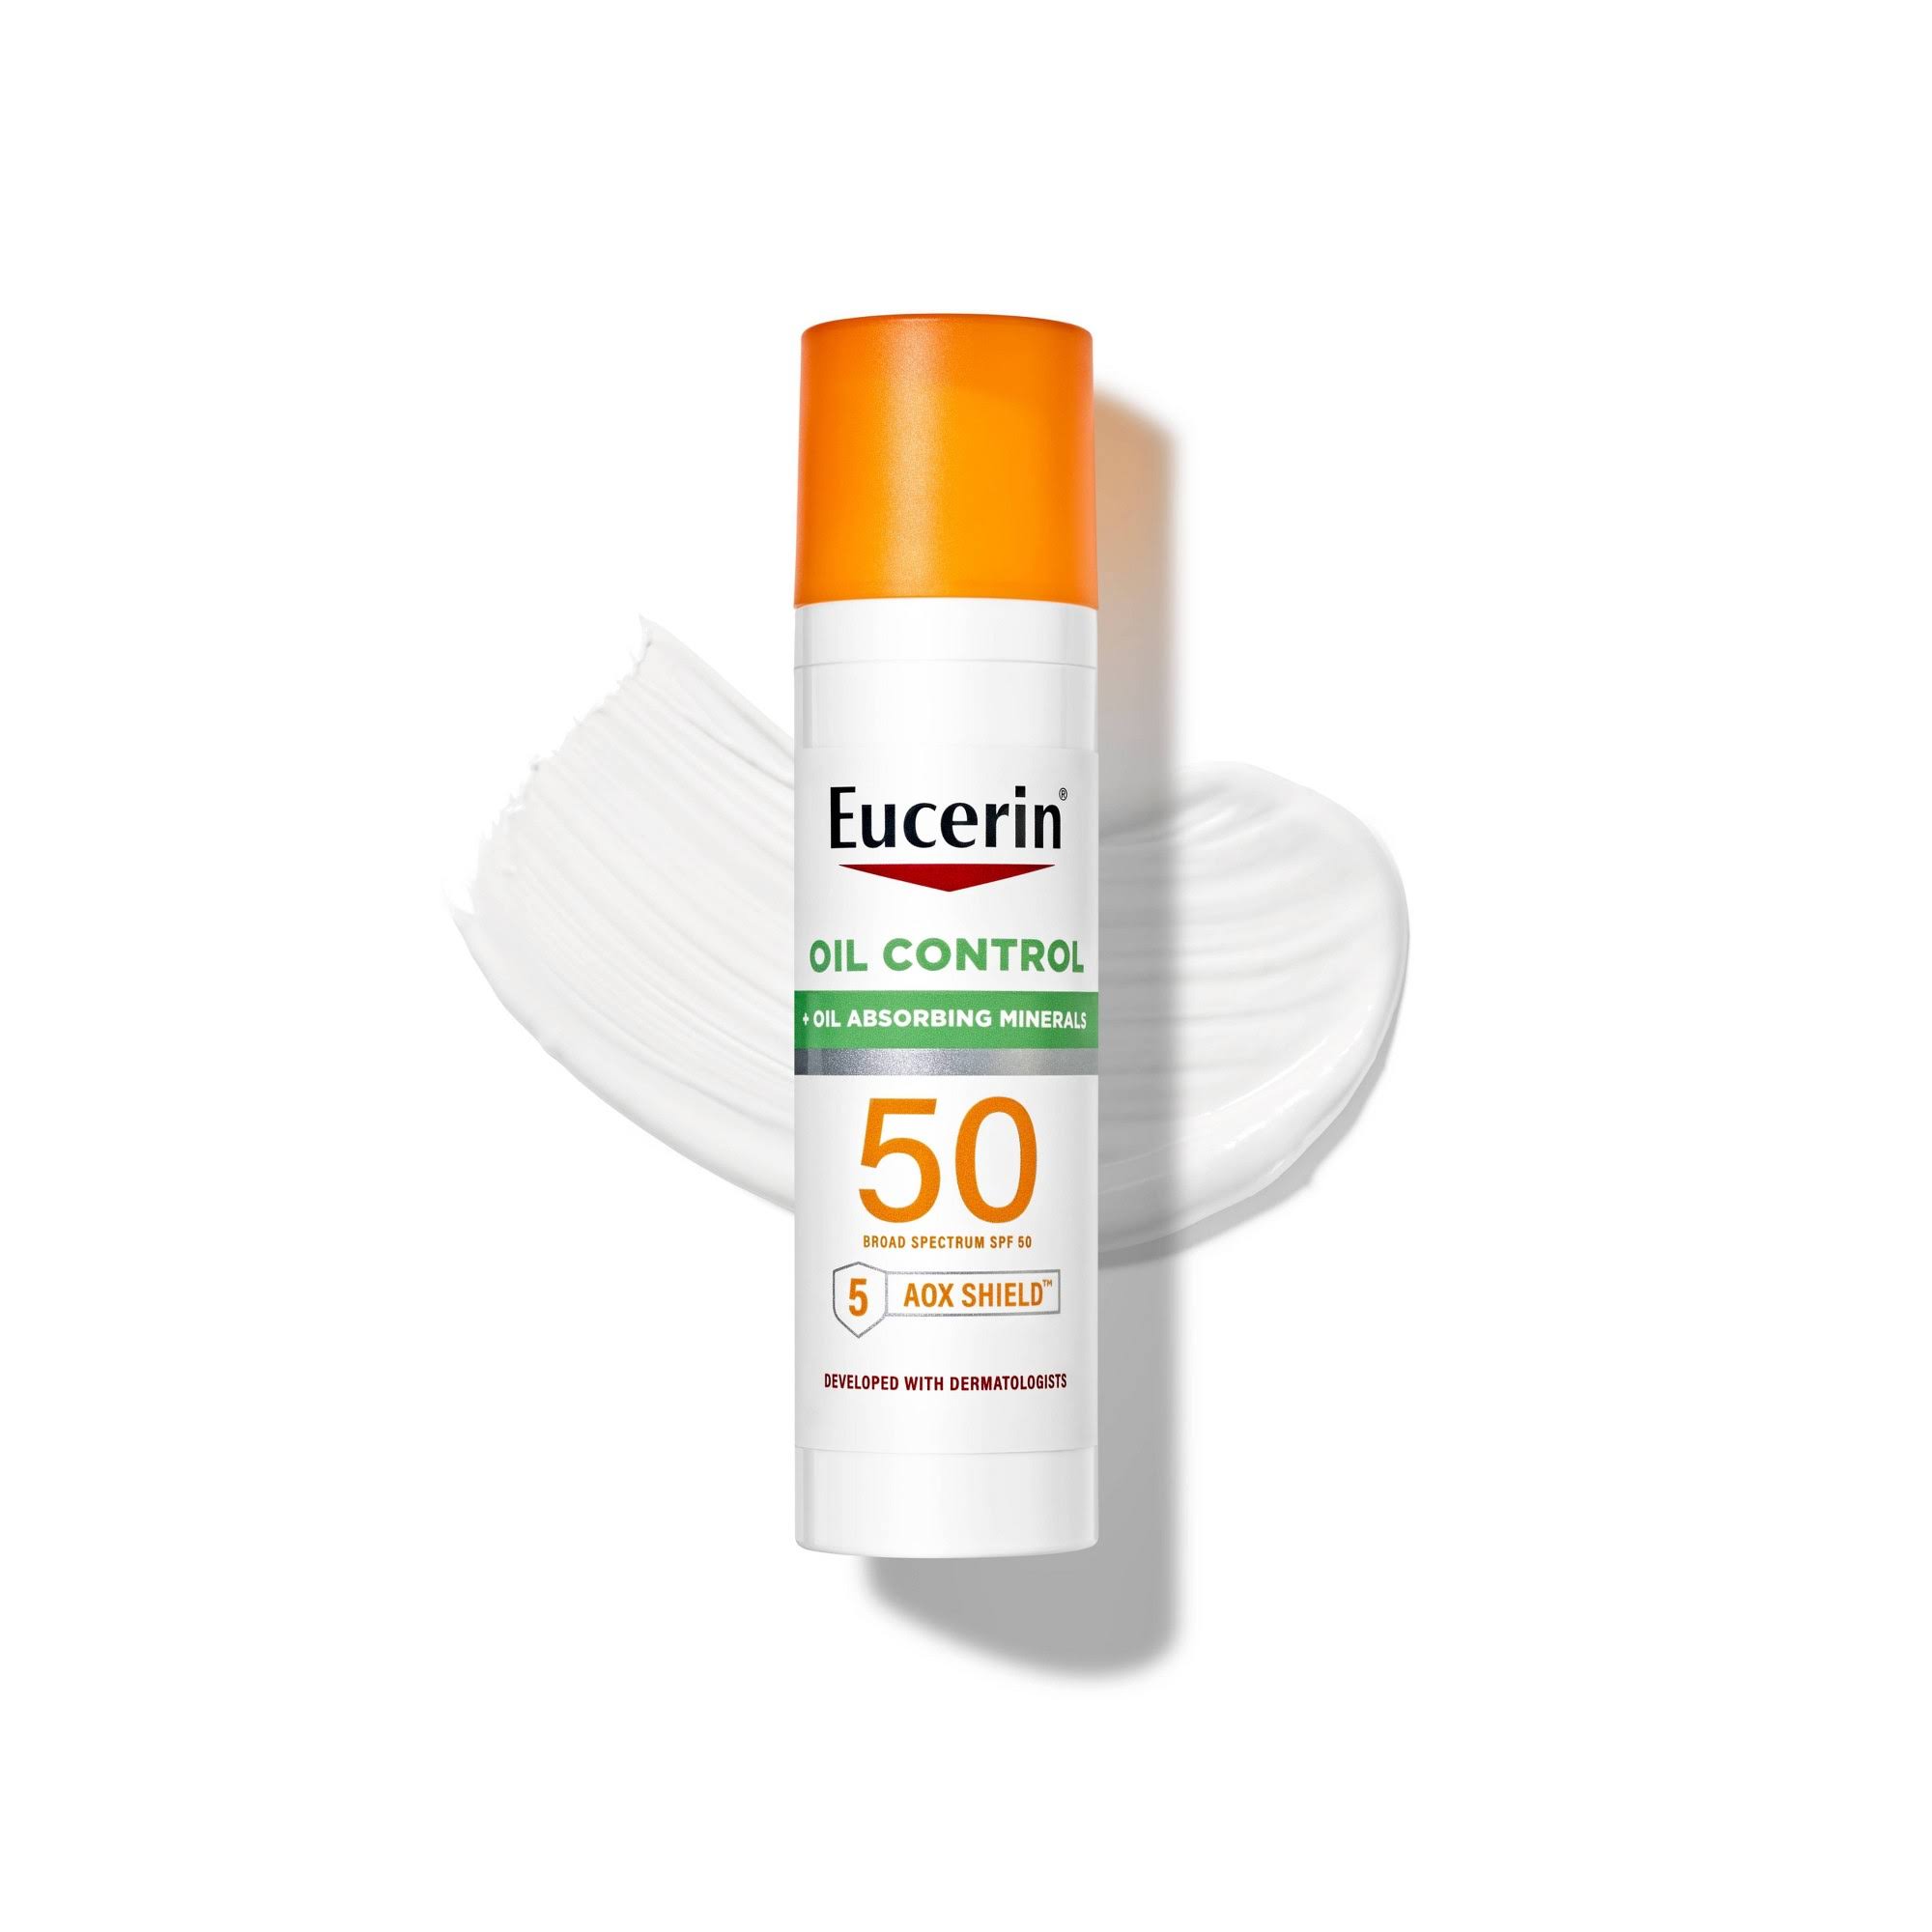 Eucerin Sun Oil Control SPF 50 Face Sunscreen Lotion With Oil Absorbing Minerals, 2.5 Fl Oz Bottle